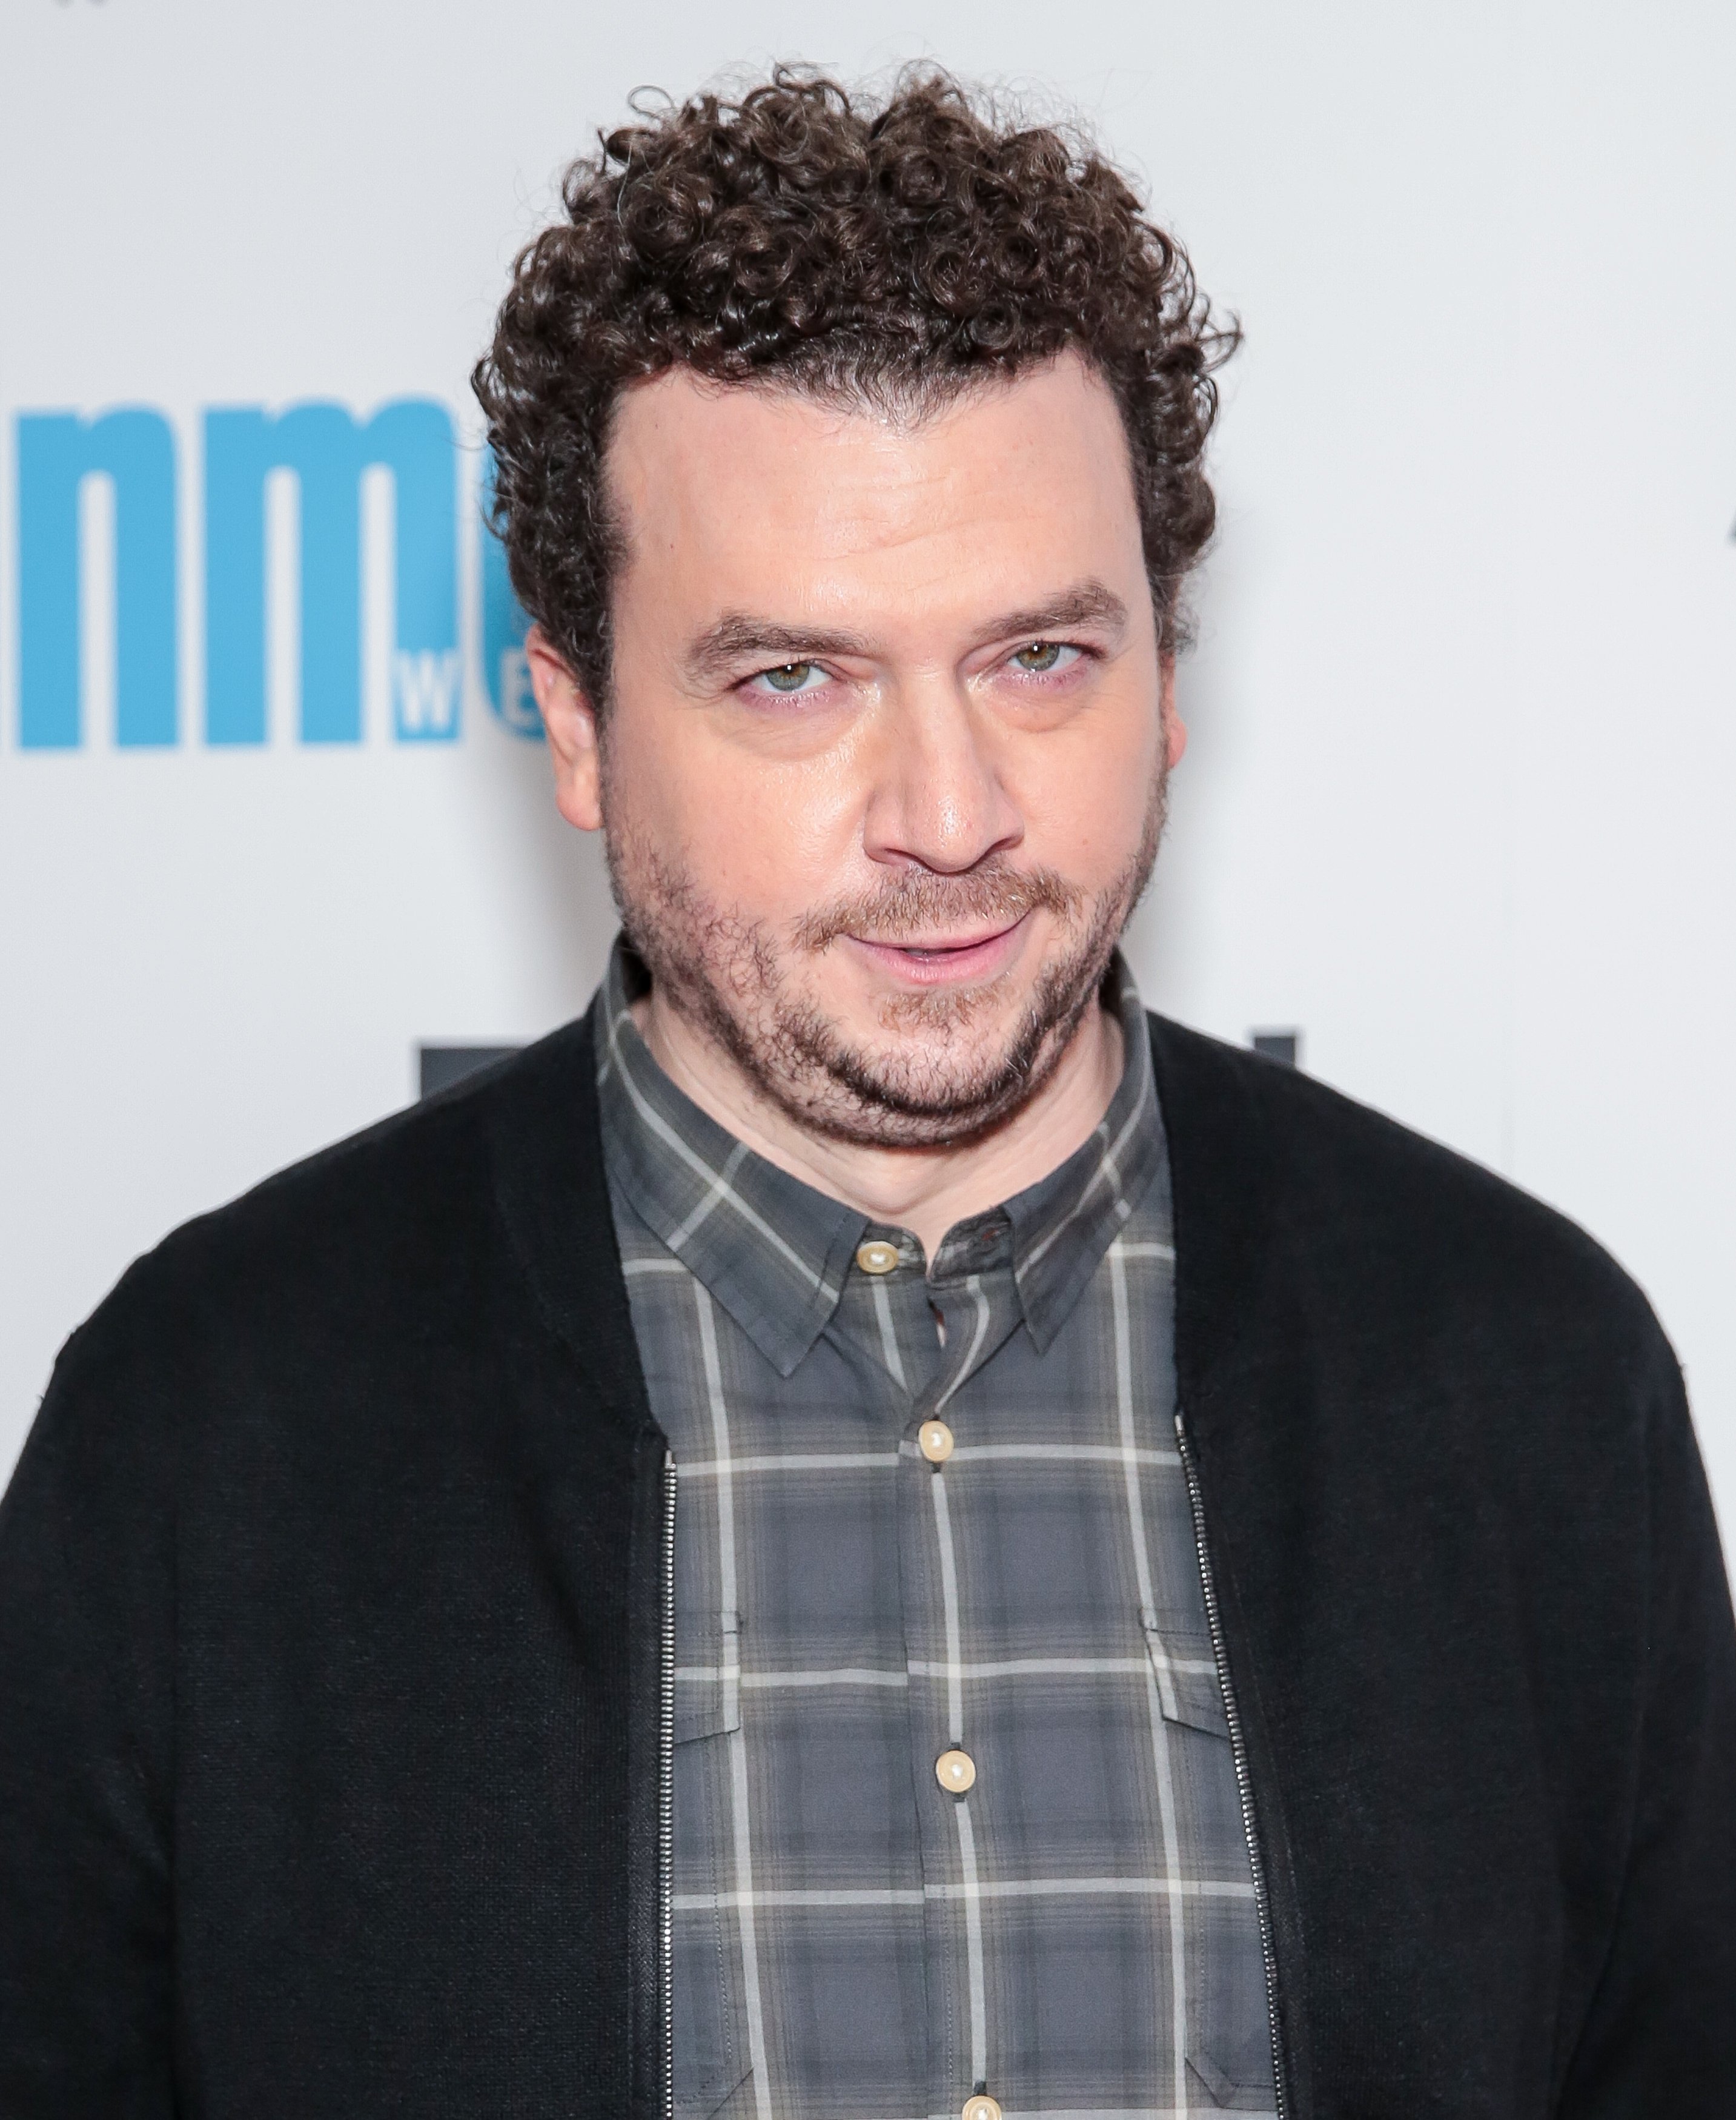  Danny McBride attends the 'Alien Covenant' special screening at Entertainment Weekly on May 15, 2017 in New York City. | Source: Getty Images